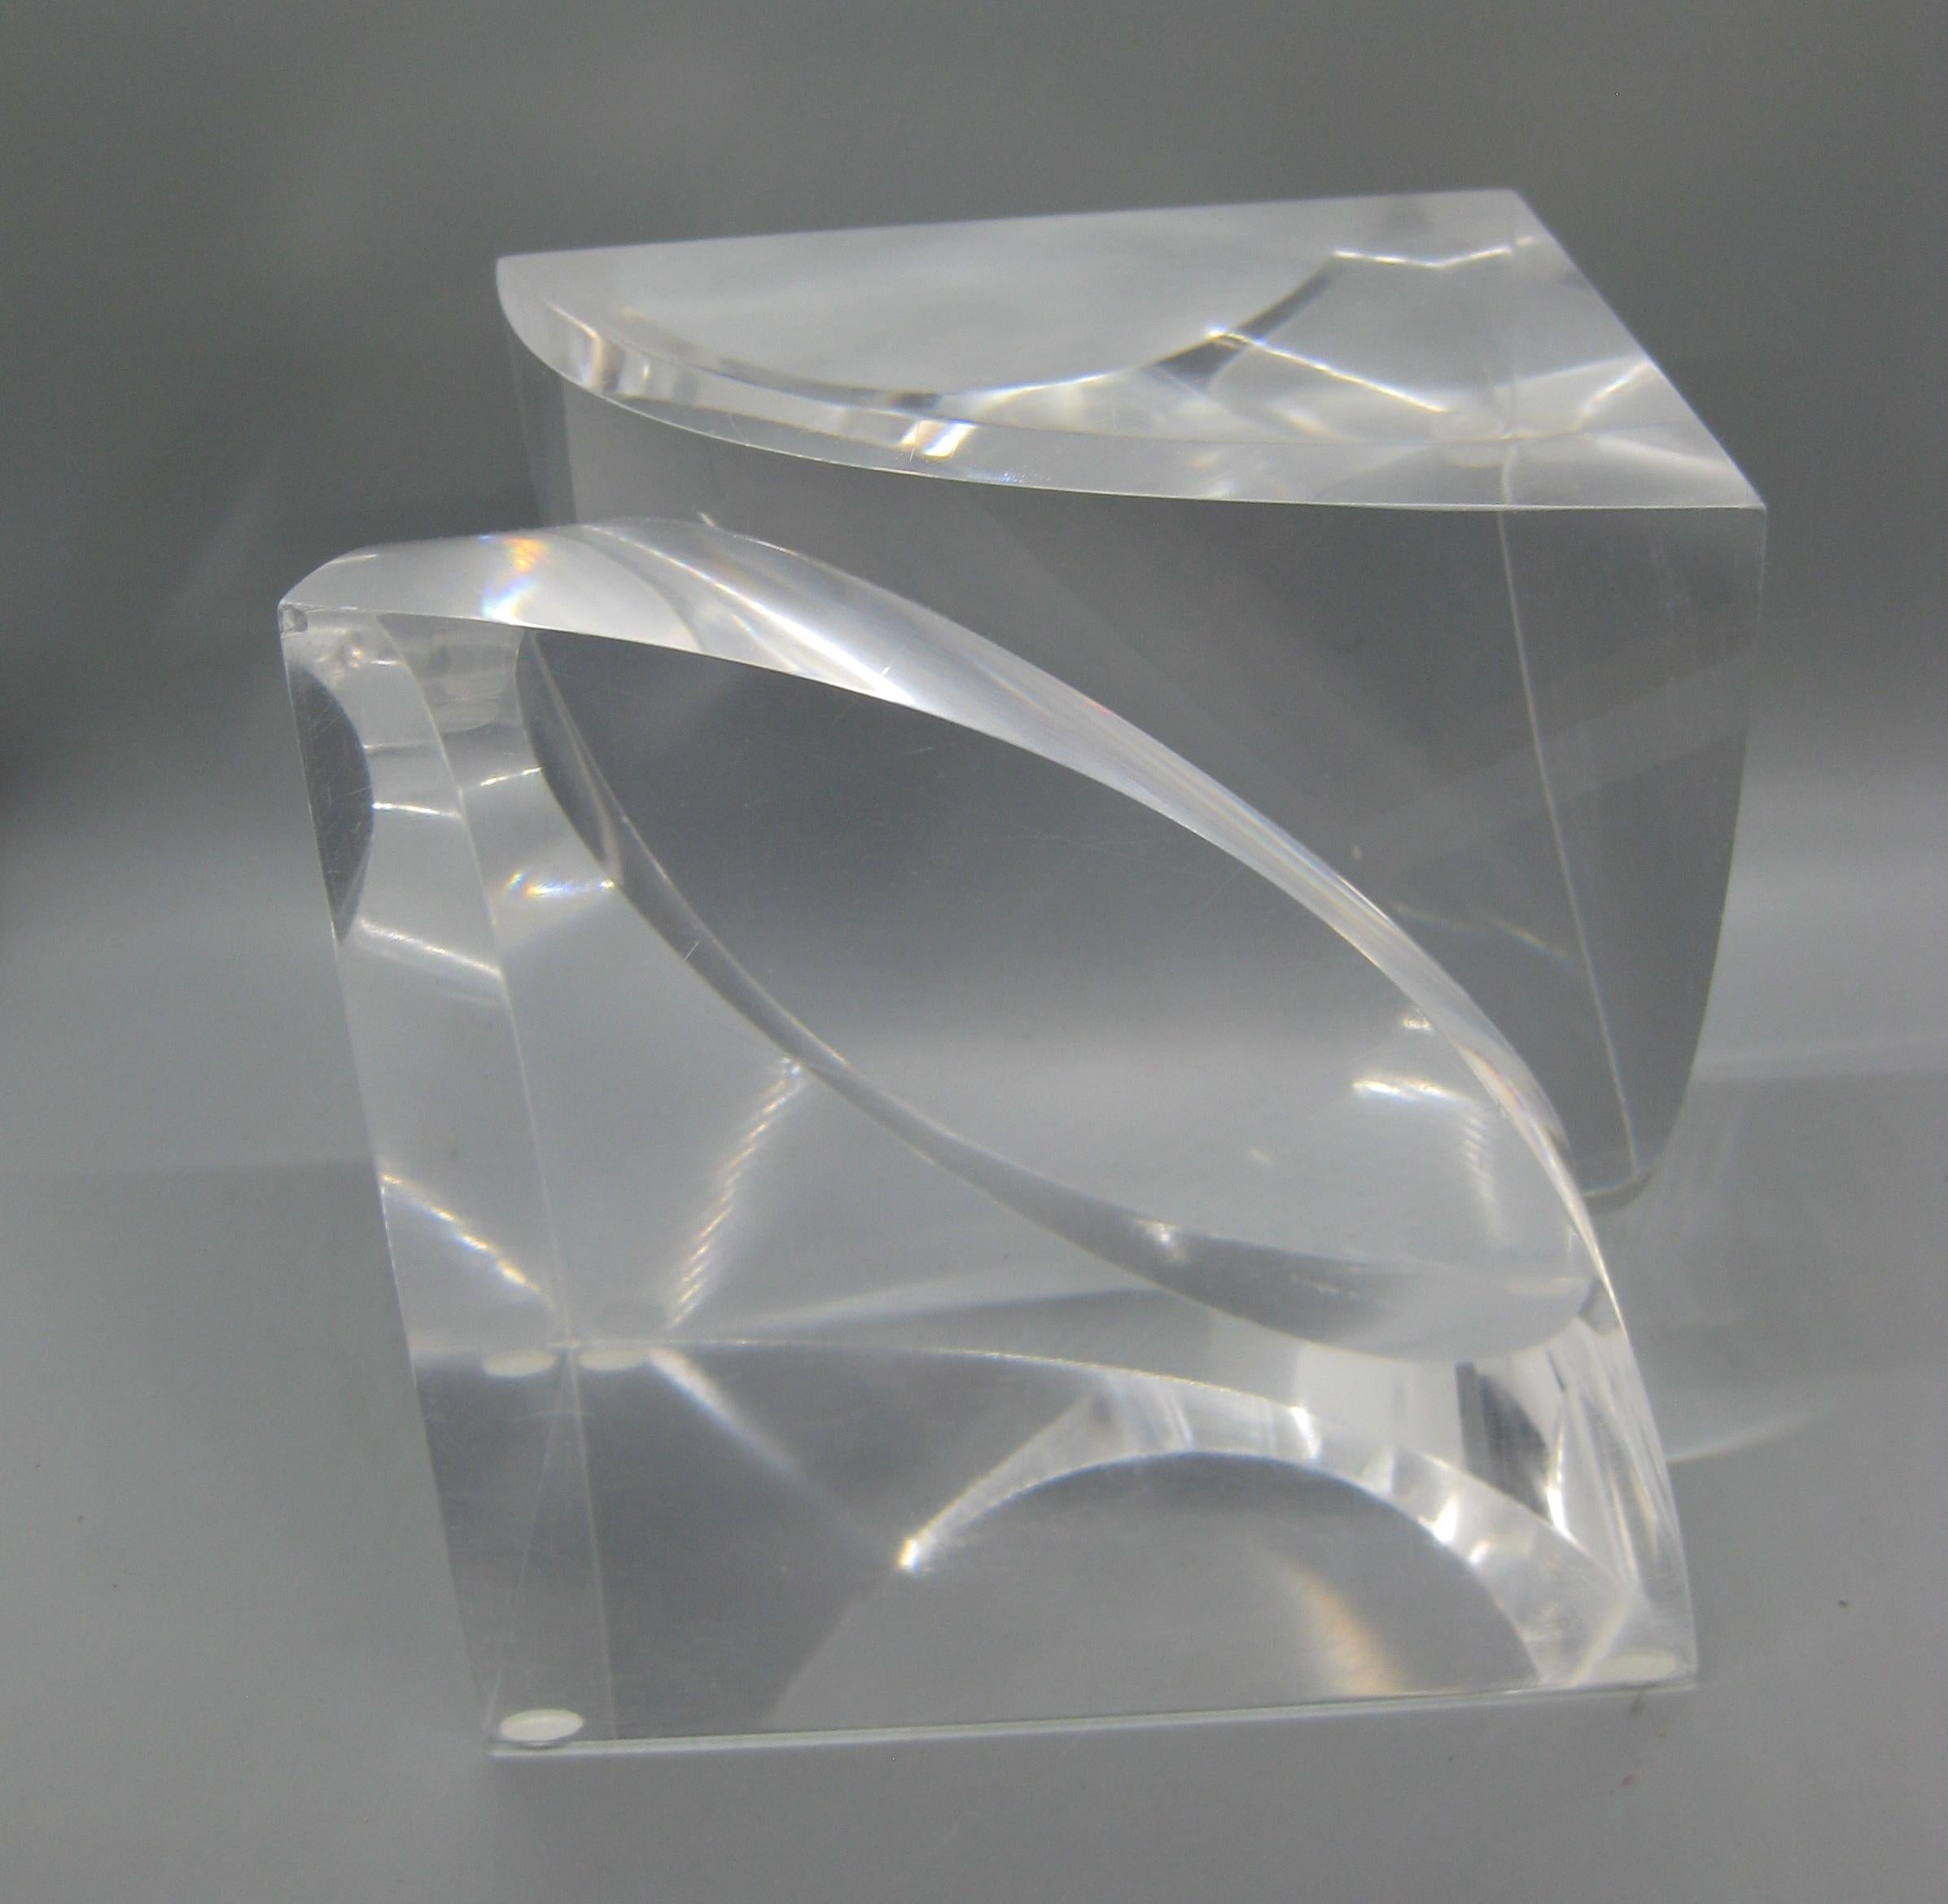 1960's-1970's Lucite Acrylic Optical Op-Art Large Cube Abstract Sculpture For Sale 3